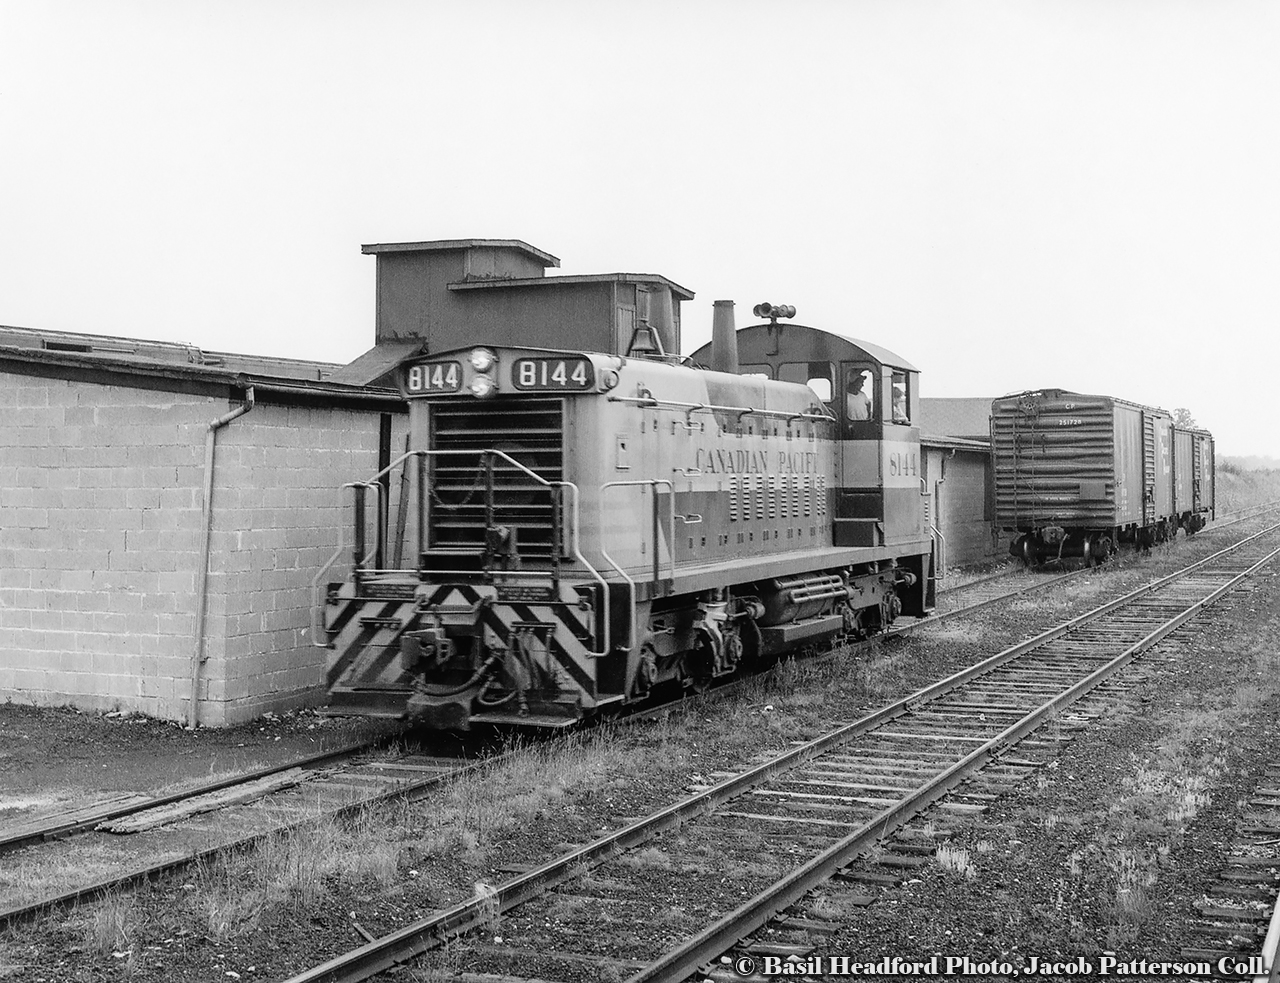 The Last Mixed, Part 1.  On Saturday, August 4, 1962, four railfans from the Upper Canada Railway Society, including Basil Headford, boarded Canadian Pacific Mixed train M741 at Guelph headed northwest to Goderich on what was the final run of southern Ontario’s last CPR mixed train.Seen from combine 3313 spotted near the Millbank station, SW1200RS 8144 coasts down the siding returning to it’s train on the main after spotting two boxcars at Millbank Flour & Feed.  Note the boxcars on the other side of the building on their coal siding.  The train will continue to Goderich, becoming M742 for the return to Guelph.An article detailing the trip appeared in the September 1962 newsletter: found here.CPR 8144, built by GMD in 1959, rebuilt to CP 1239 in 1981, retired 2012, sold to Independent Diesel Services of Minnesota.Basil Headford Photo, Jacob Patterson Collection Print.